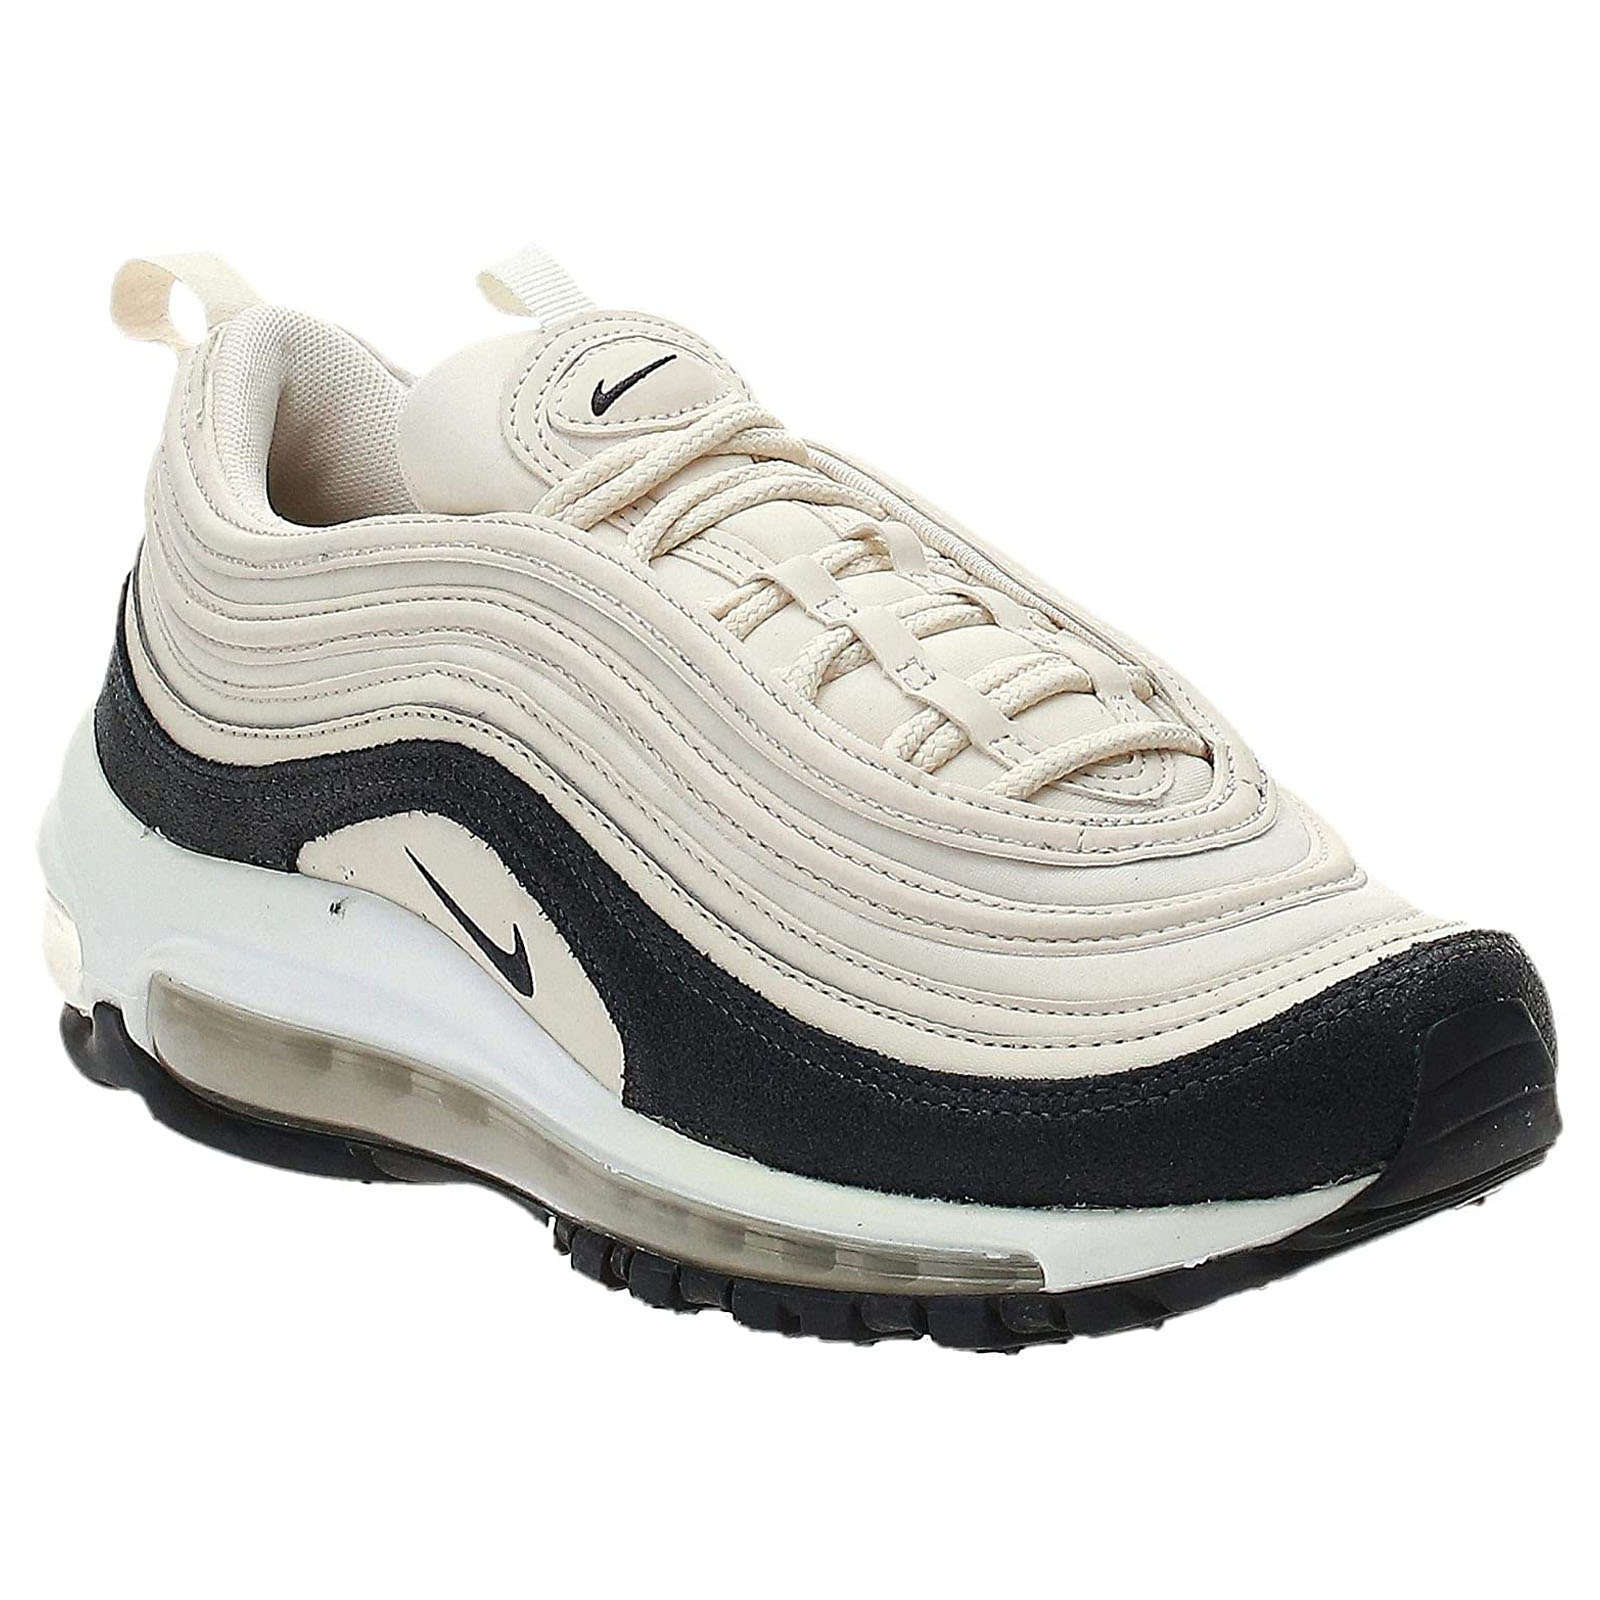 Nike Air Max 97 PRM Textile Leather Synthetic Women's Low-Top Trainers#color_light cream oil grey